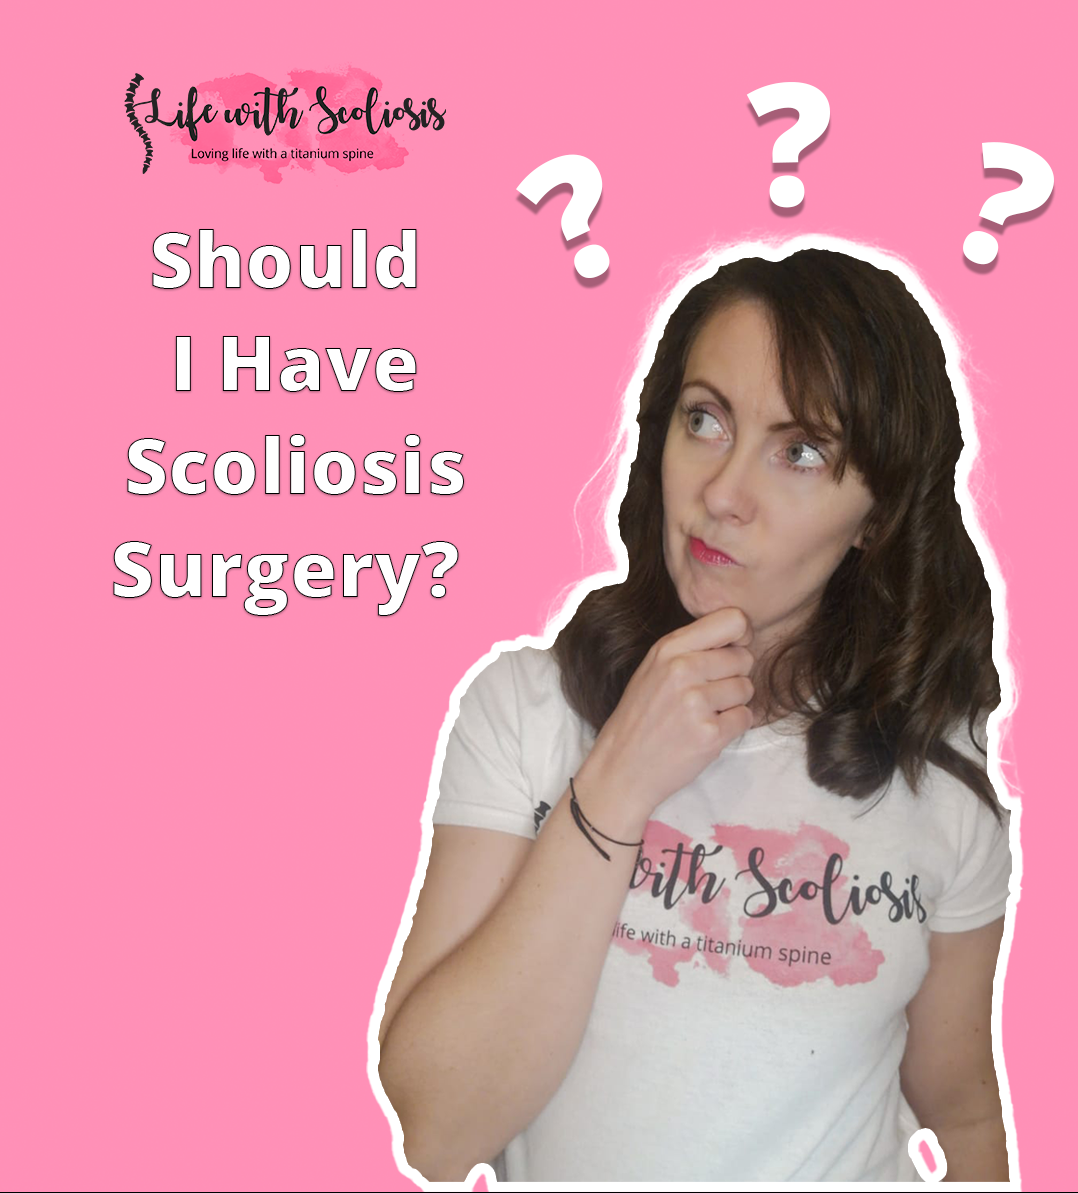 Should I have scoliosis surgery